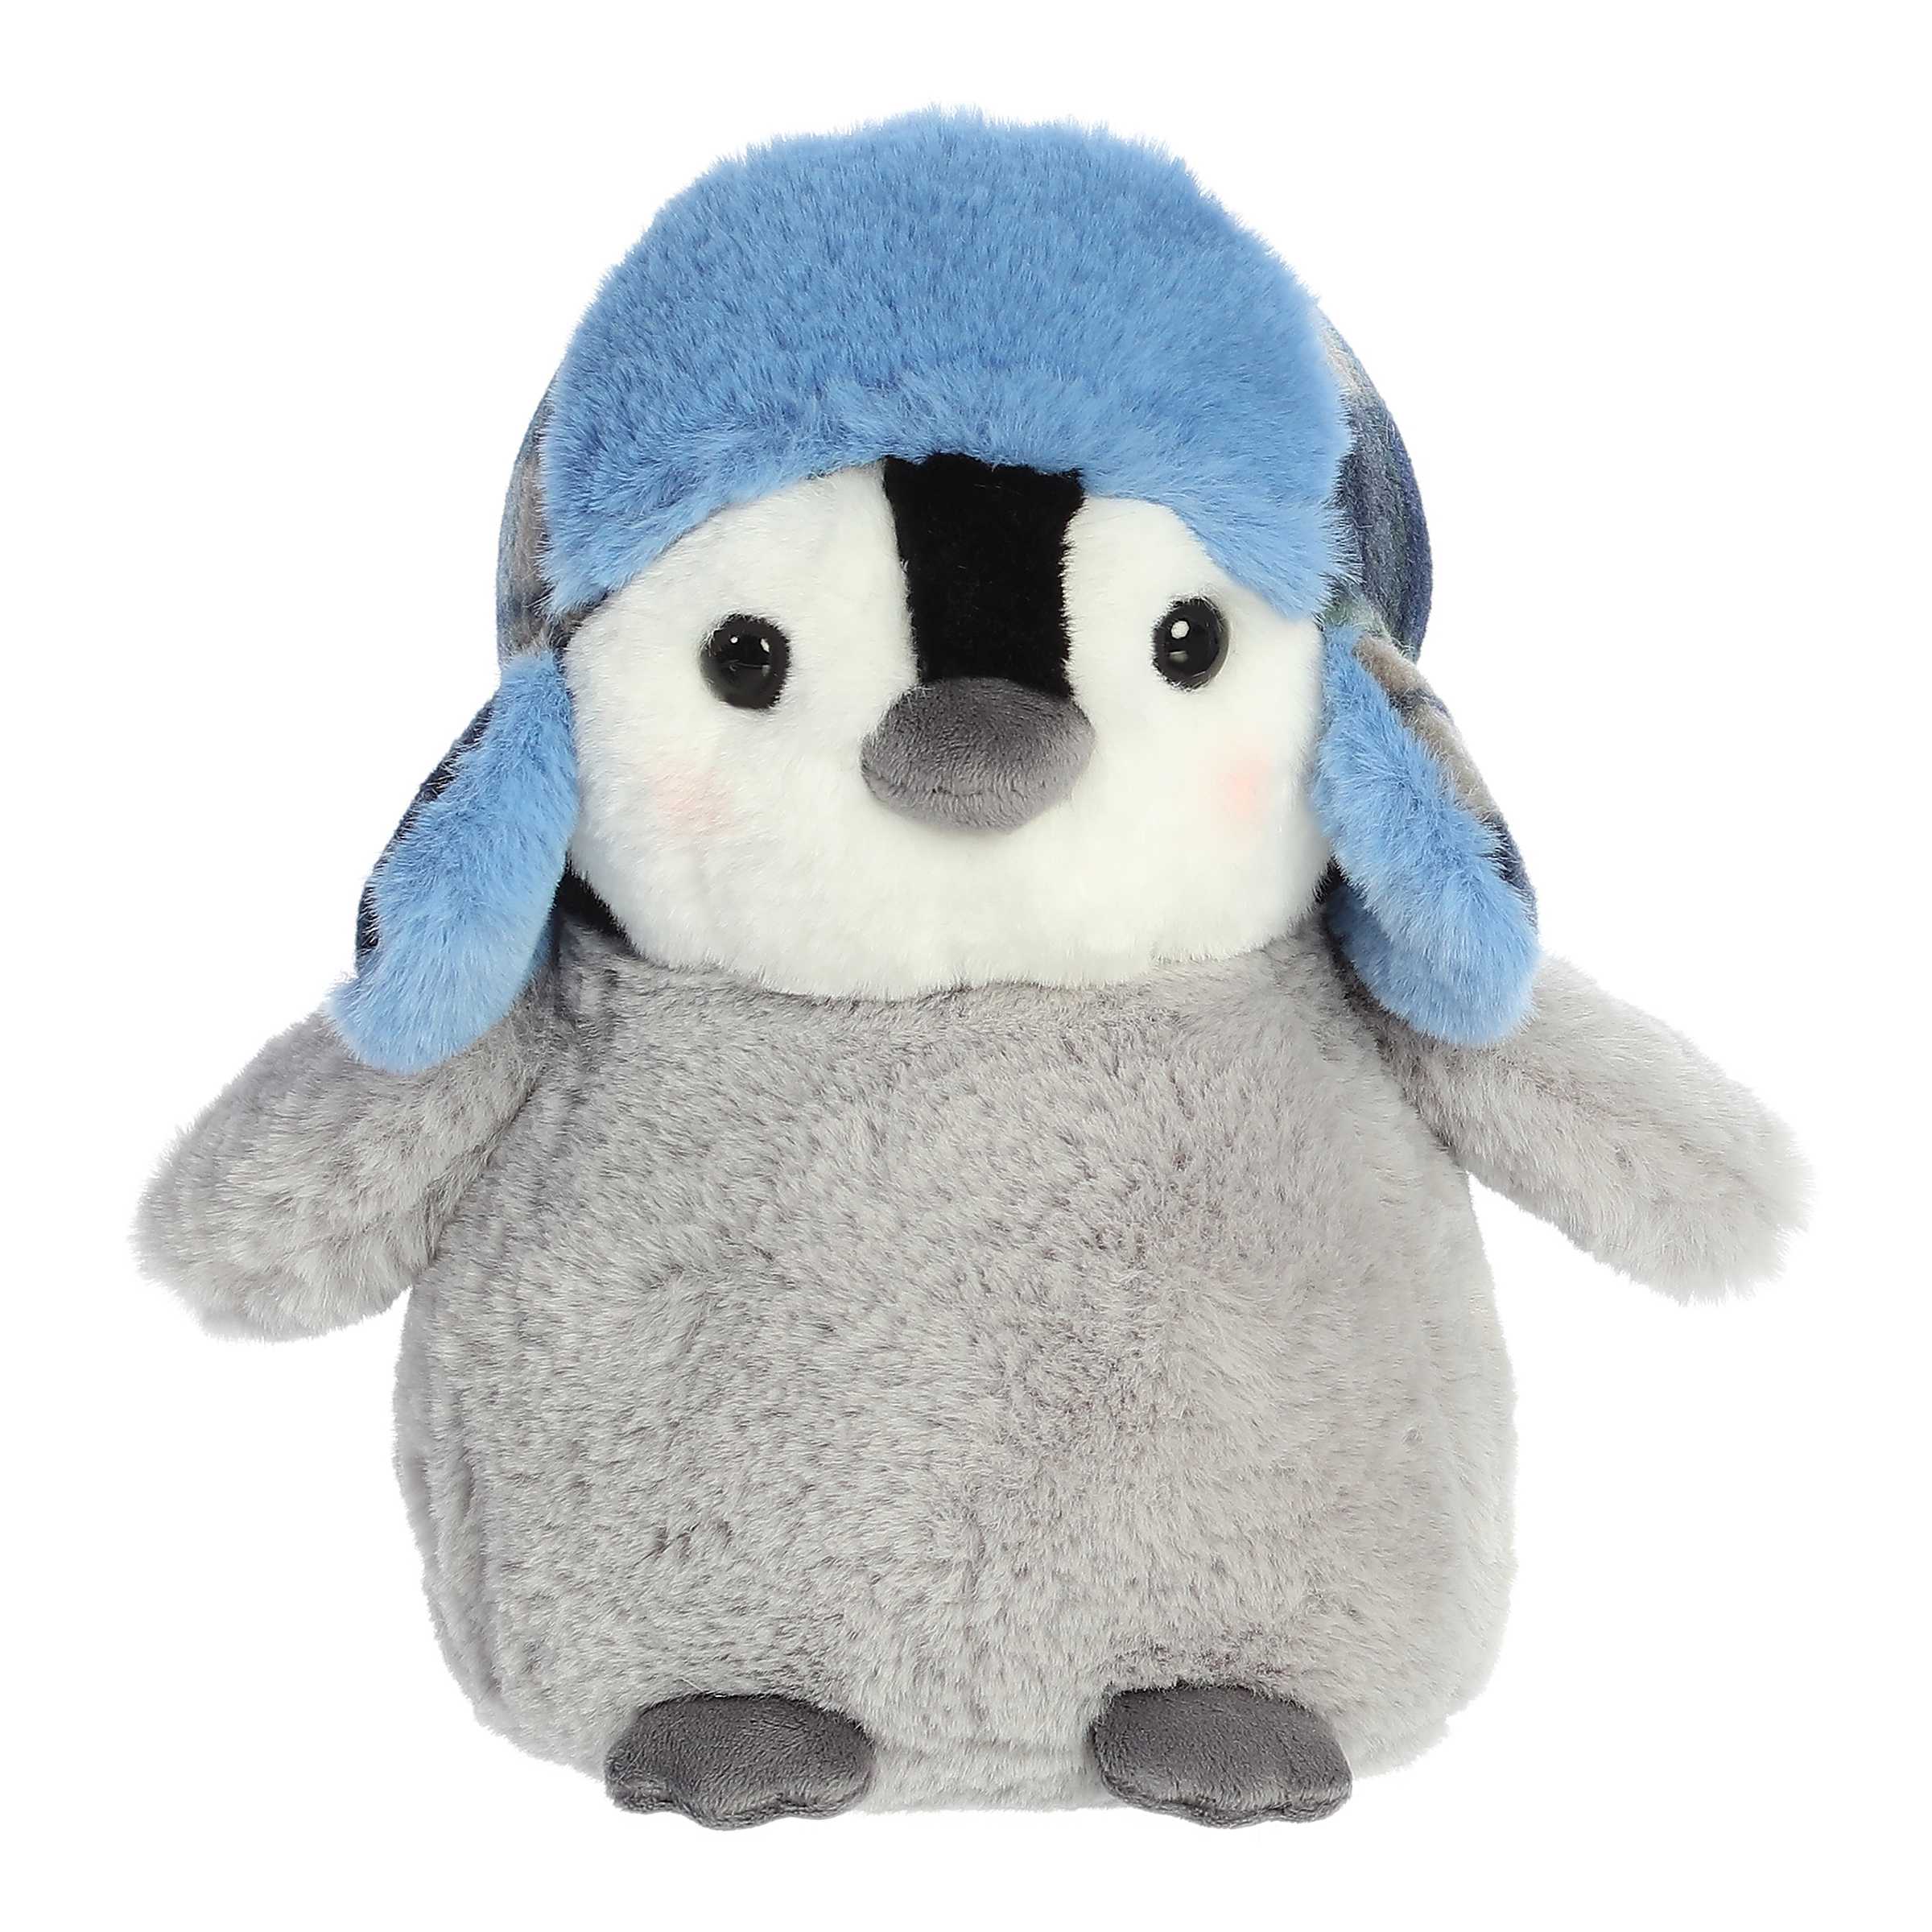 Adorable little gray chick stuffed animal with light pink cheeks wearing a non-detachable blue winter trapper hat